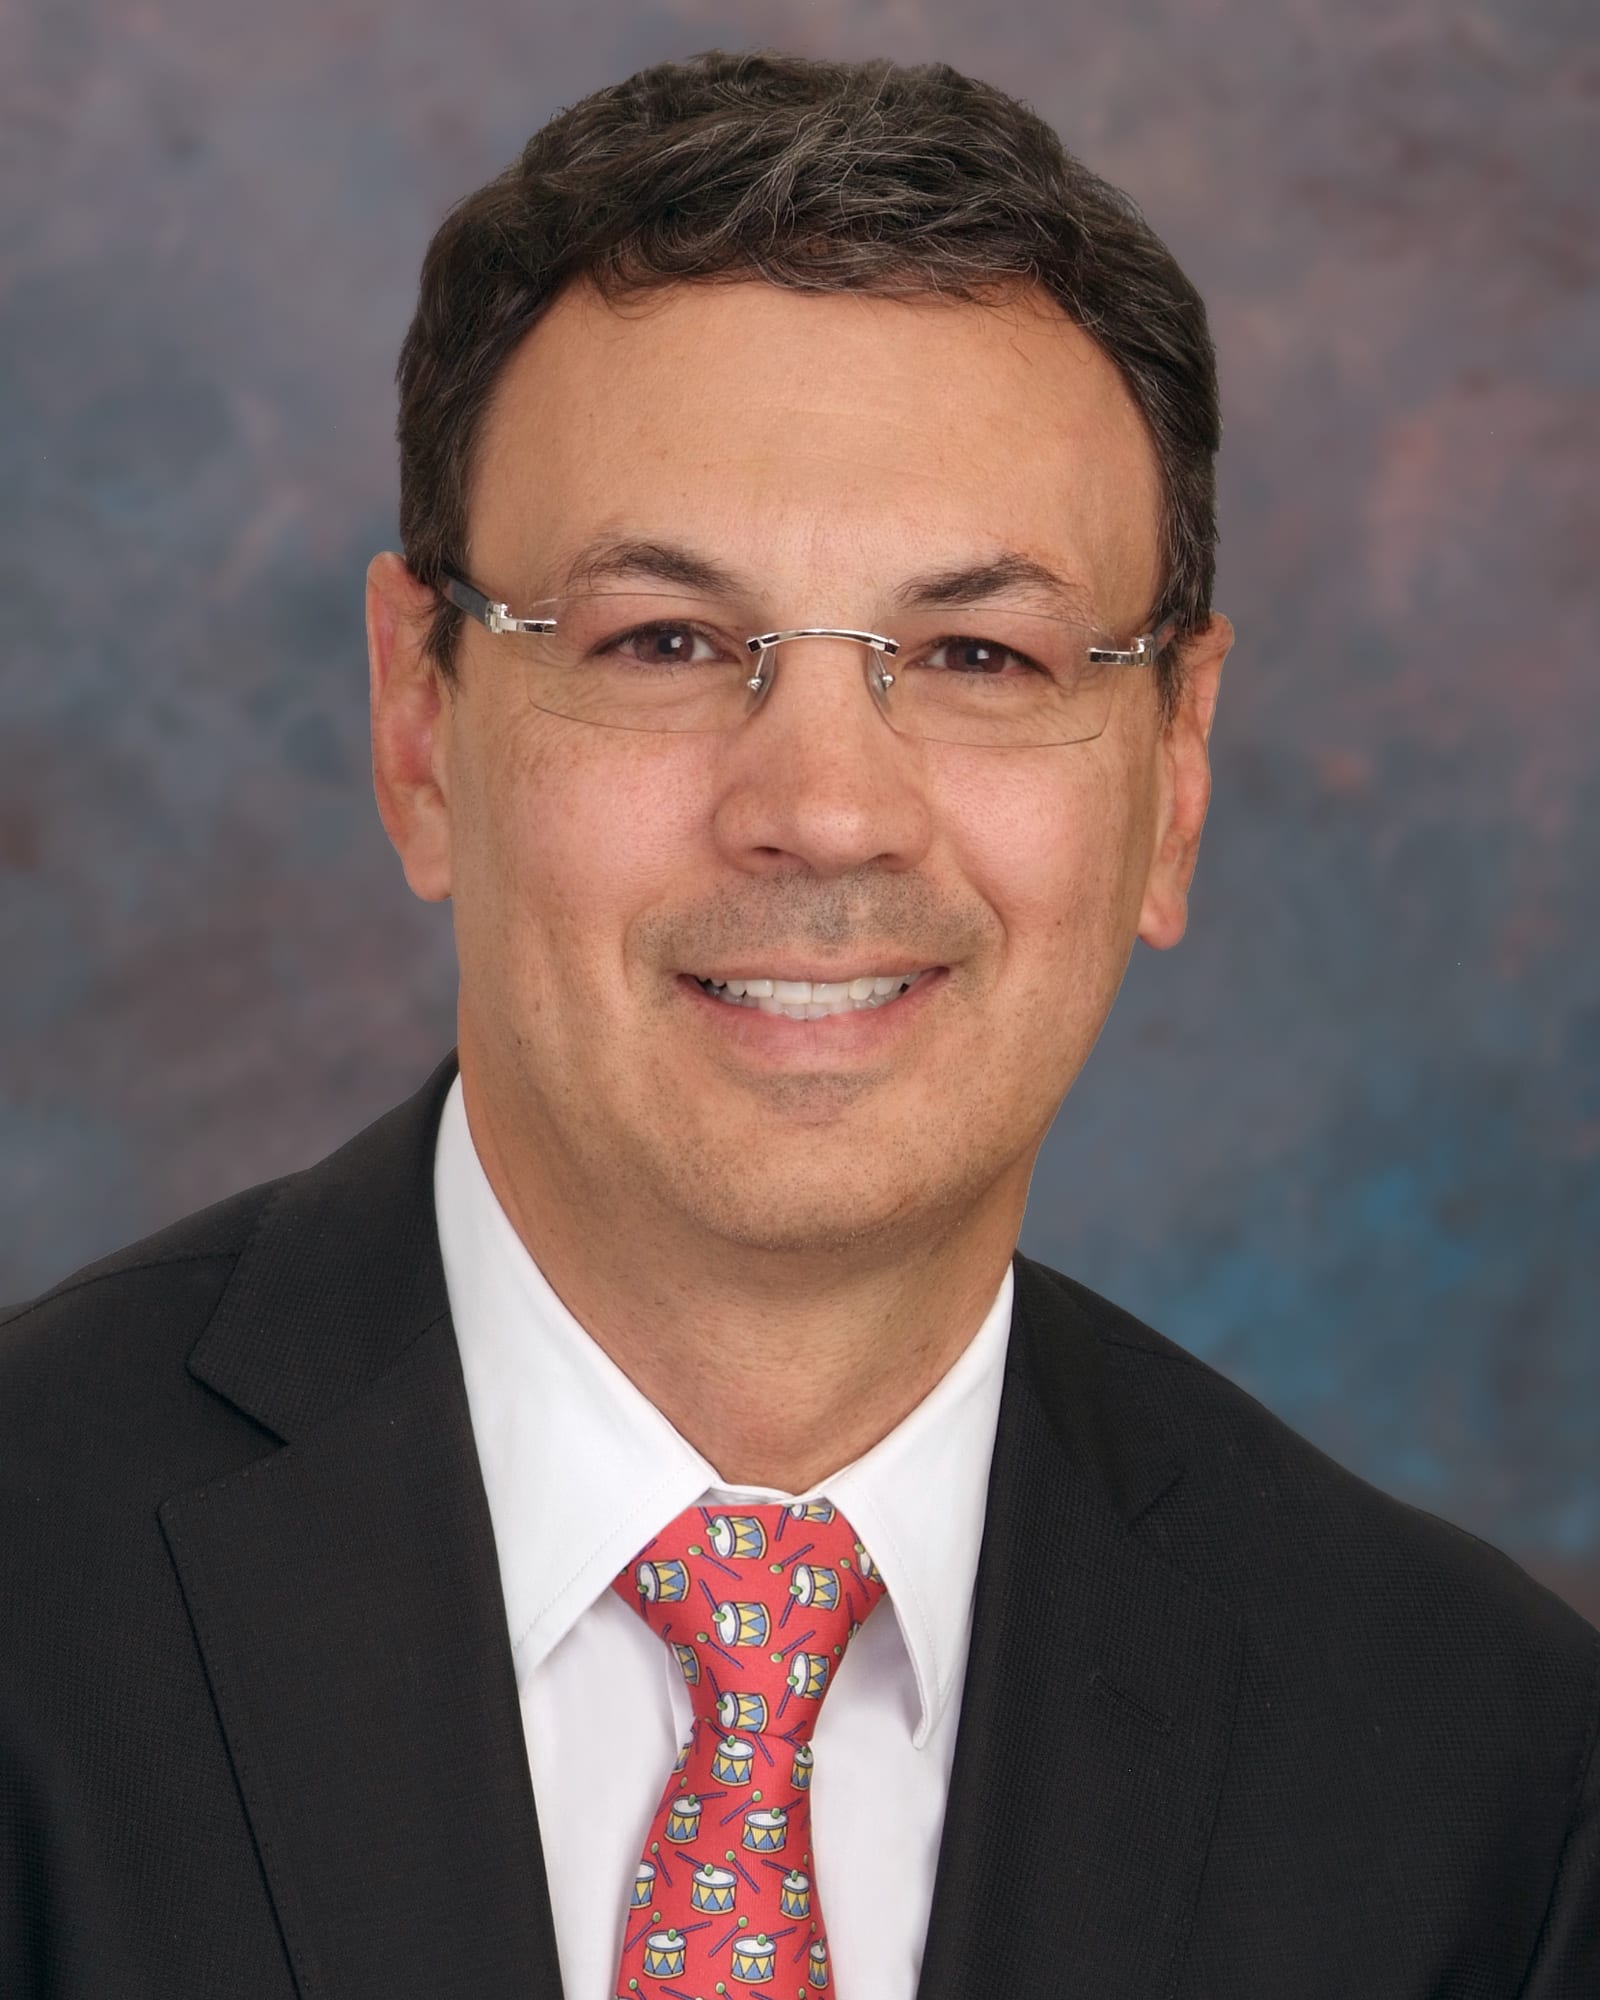 Photograph of Dr. Juan Uribe, MD, an Arizona-based neurosurgeon specialized in minimally invasive spine surgery and spine tumor treatment.